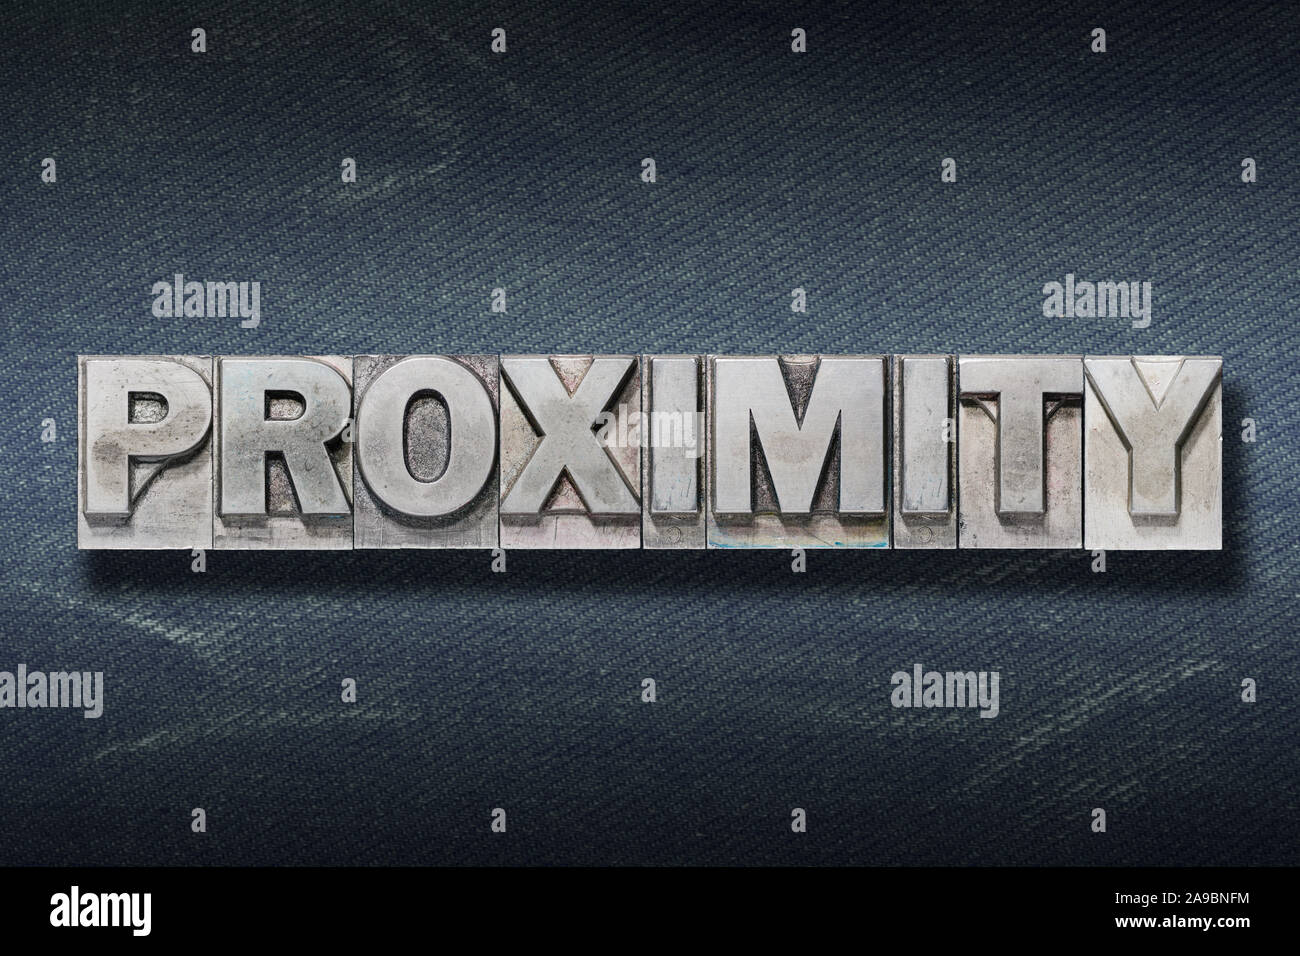 proximity word made from metallic letterpress on dark jeans background Stock Photo